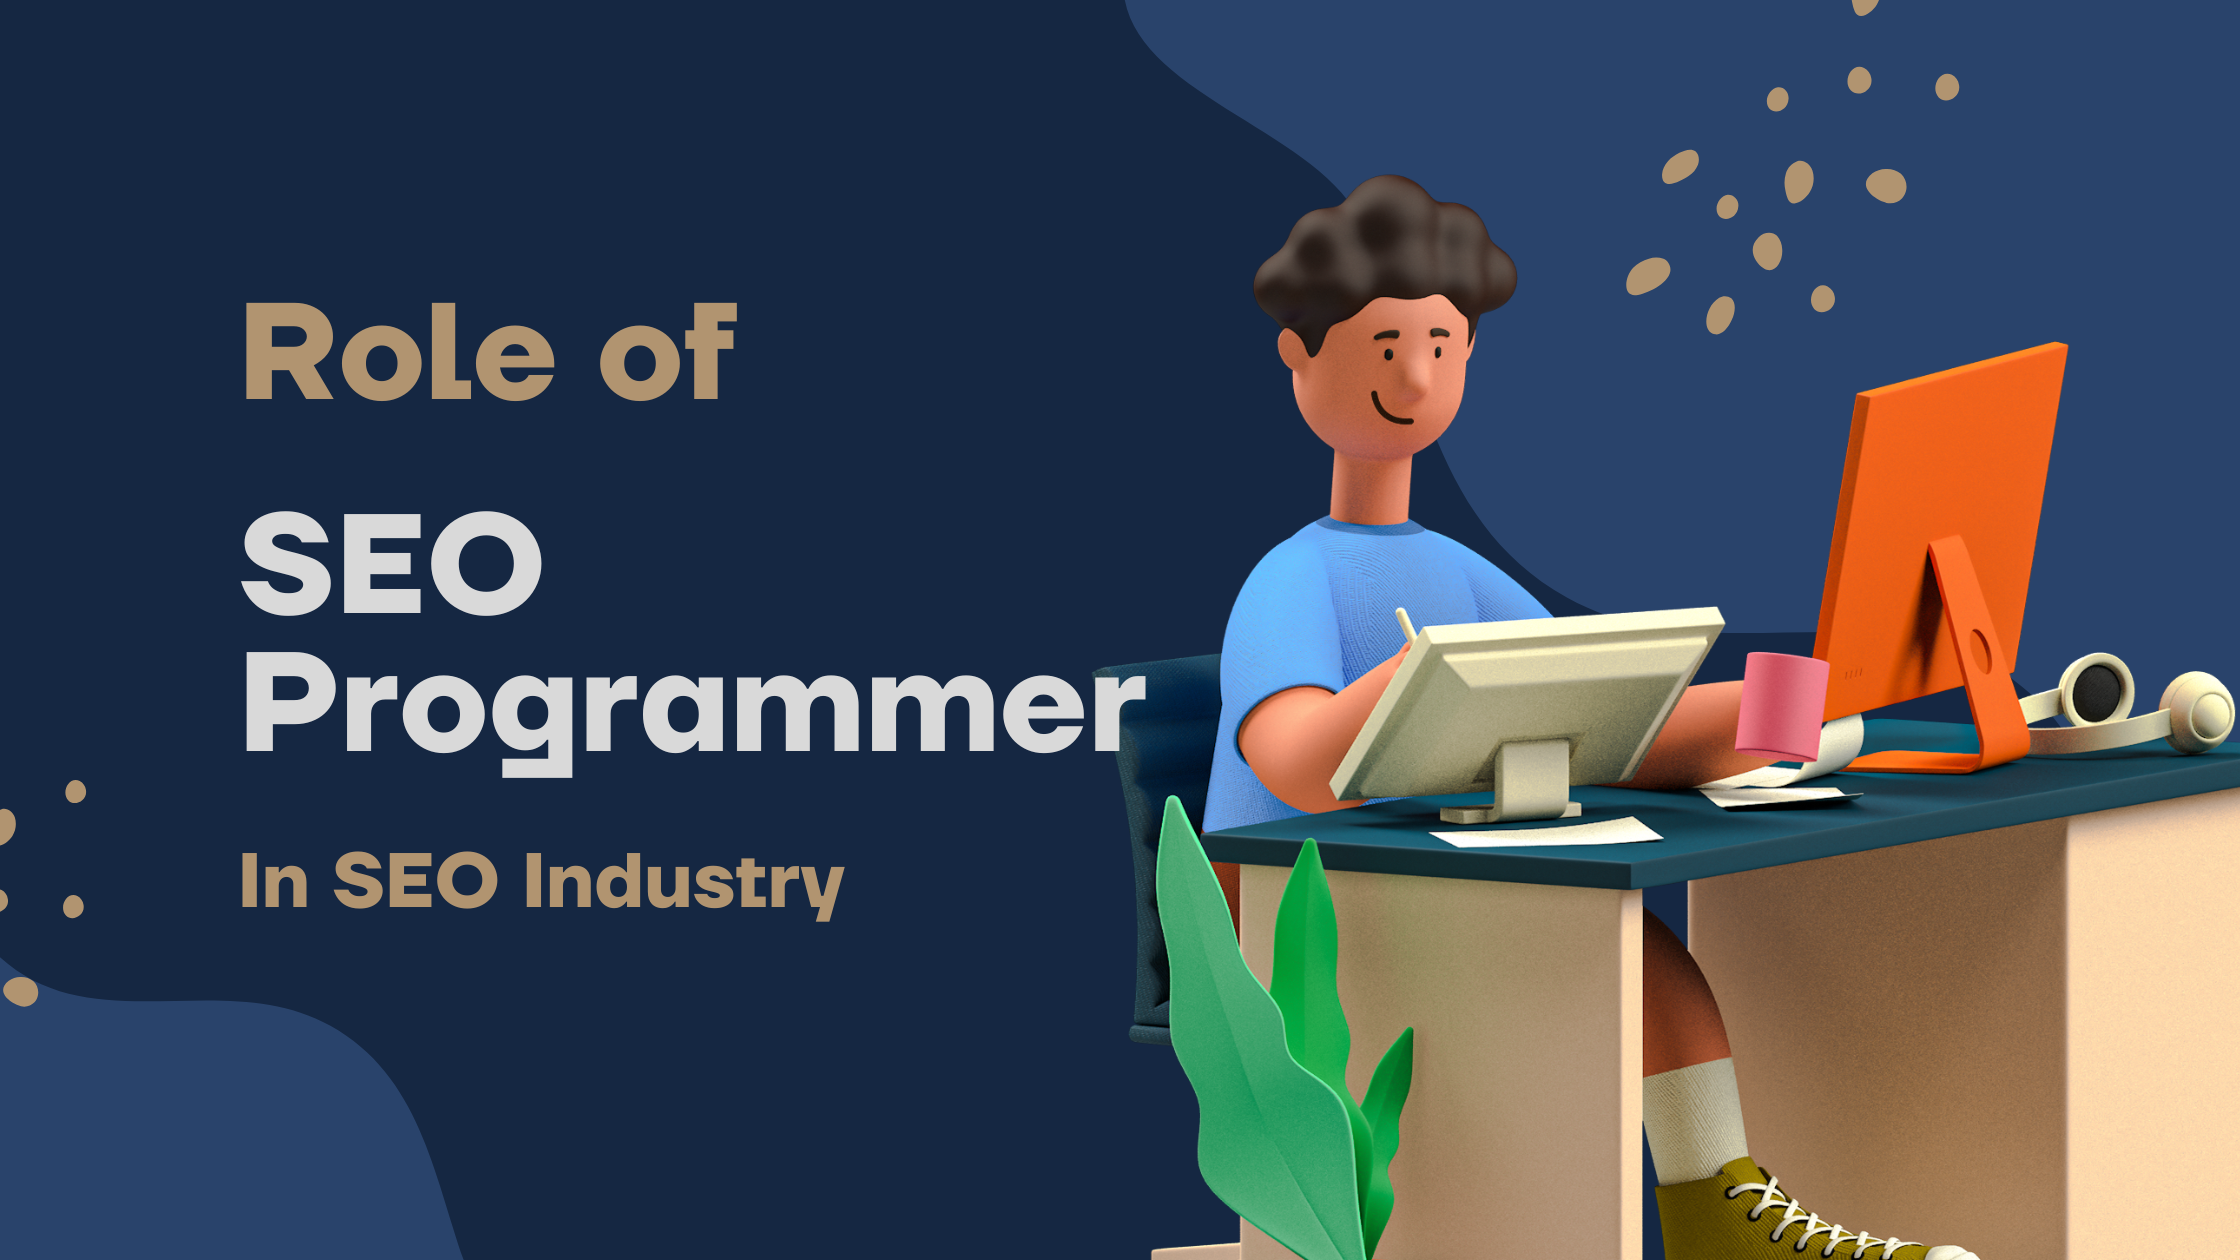 The Crucial Role of an SEO Programmer